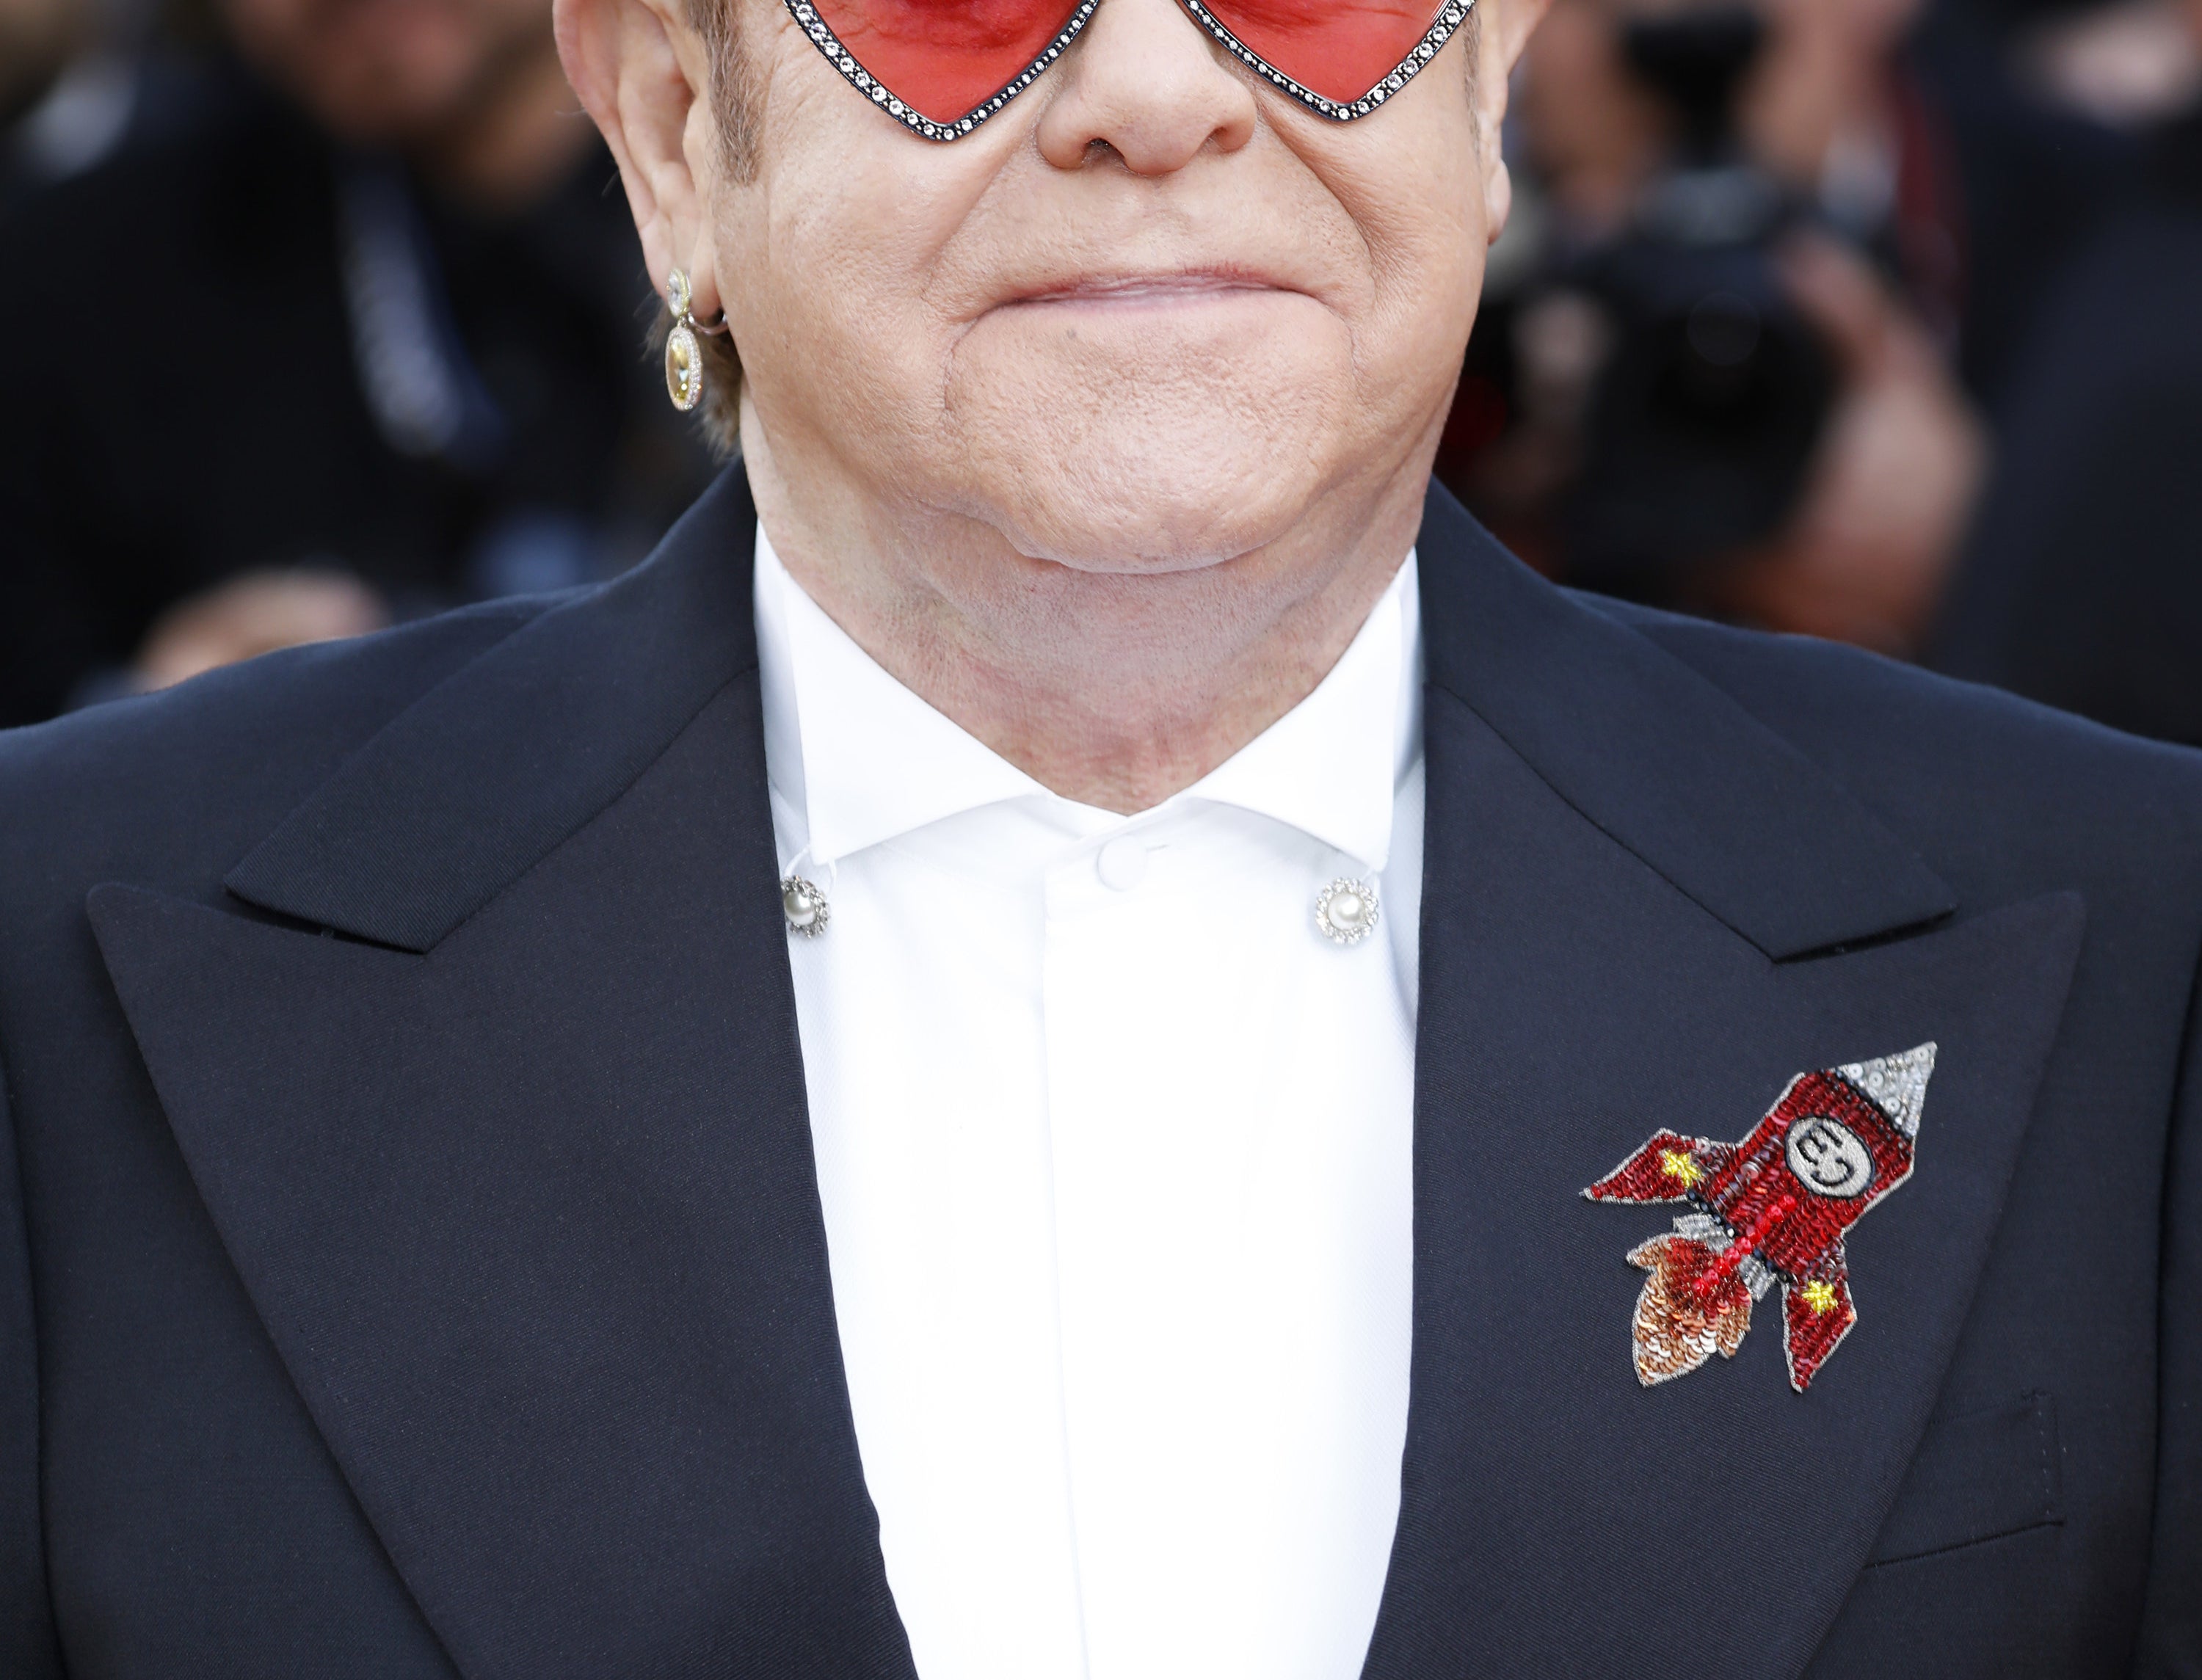 Elton John in heart-shaped sunglasses and a suit